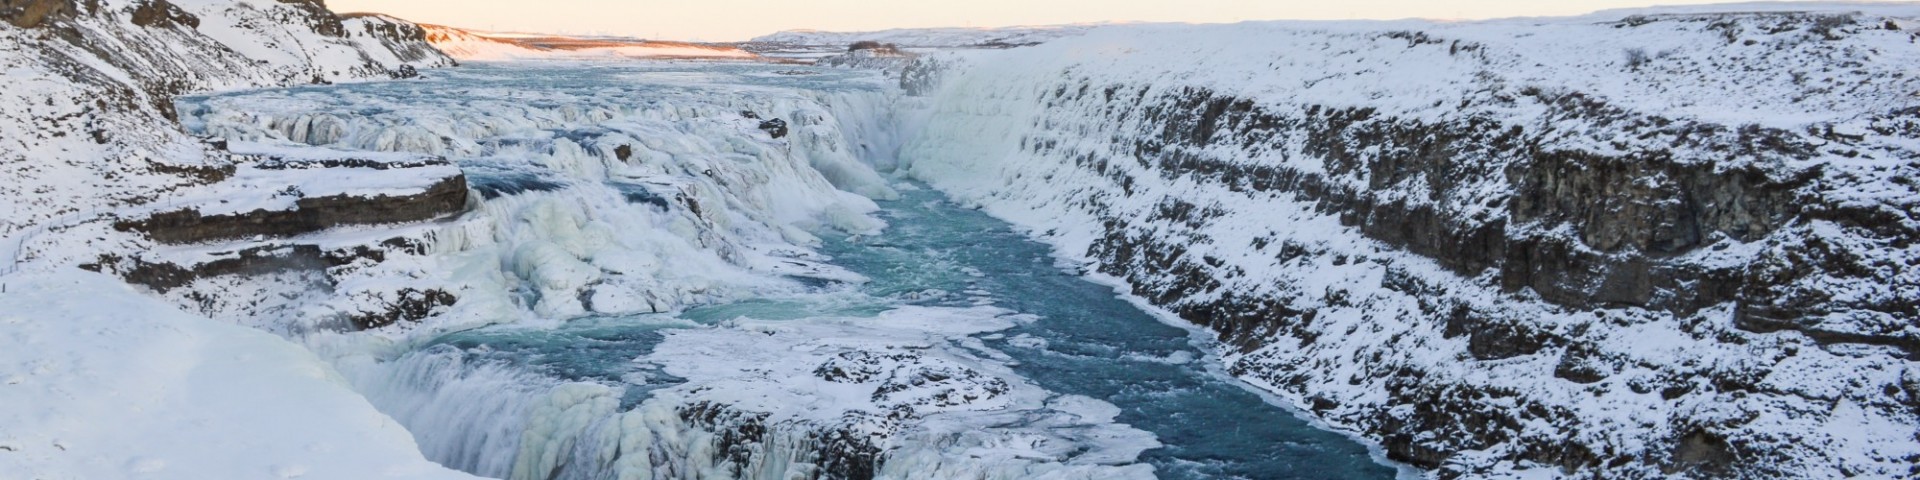 The Gullfoss Waterfall In Iceland